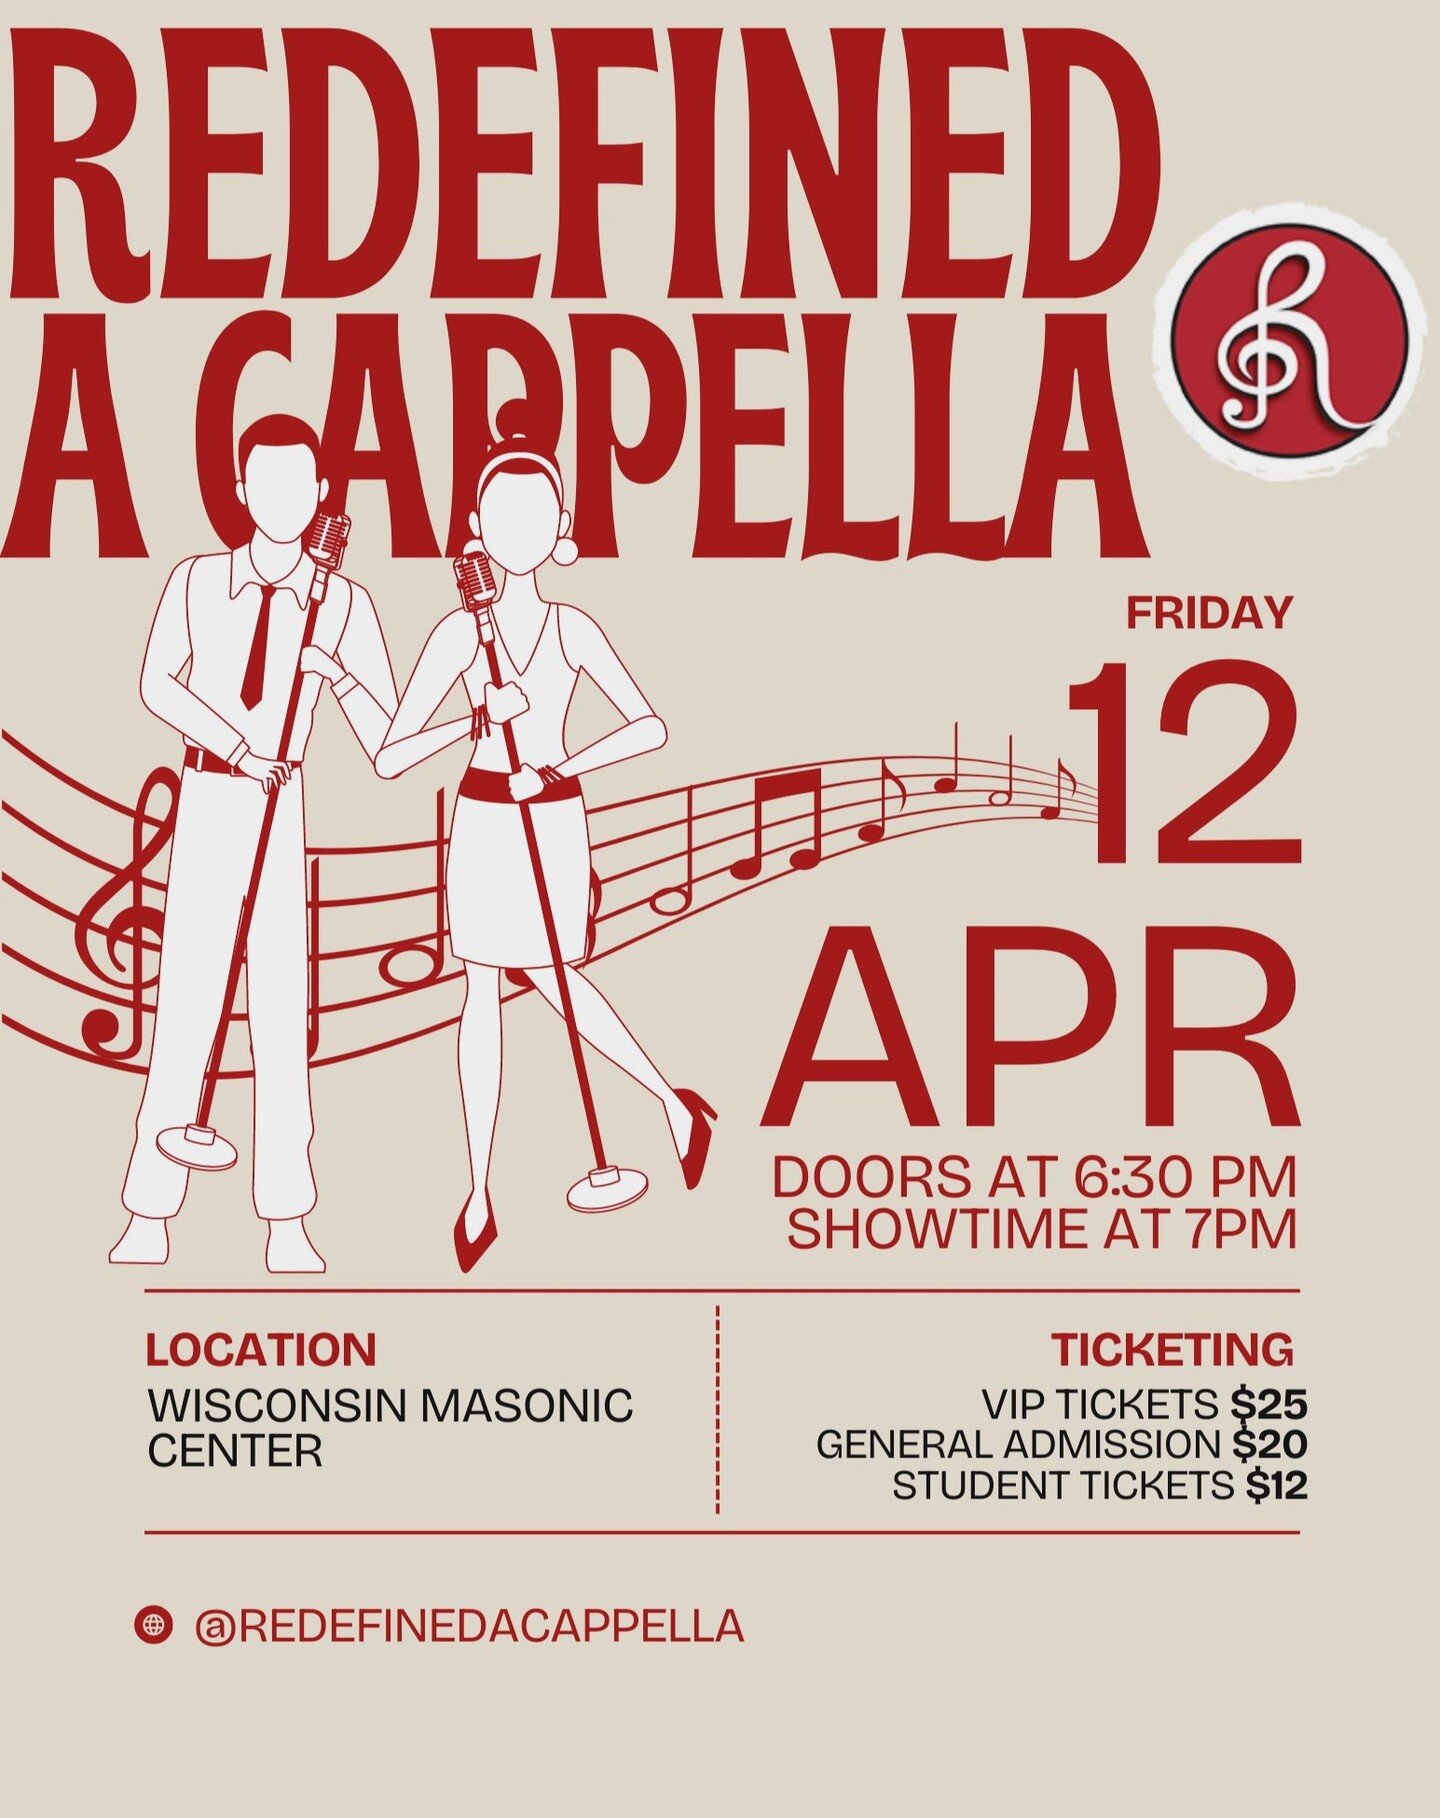 BREAKING NEWS: TICKETS ARE LIVE NOW! 🔥

Our spring concert is less than a month away! Join us at Redefined A Cappella's Spring Concert for an unforgettable night filled with harmonies that will leave you speechless. See you there! 🥰✨

Visit our bio